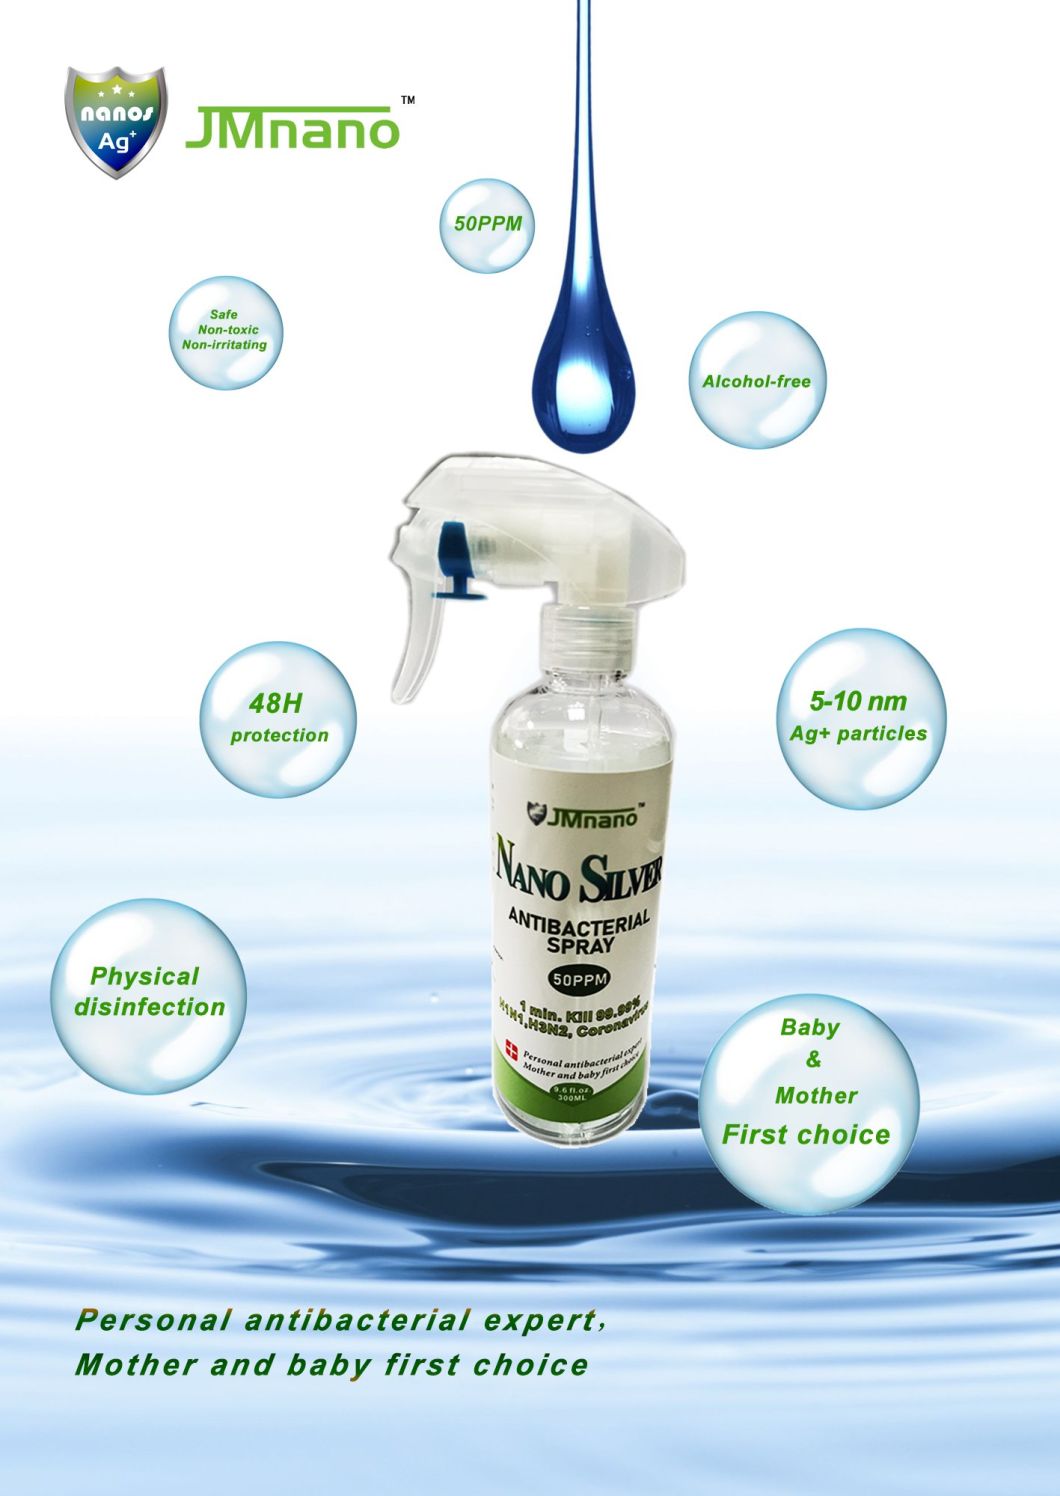 Jmnano Waterless Nano Silver Disinfectant Products Manufacturer